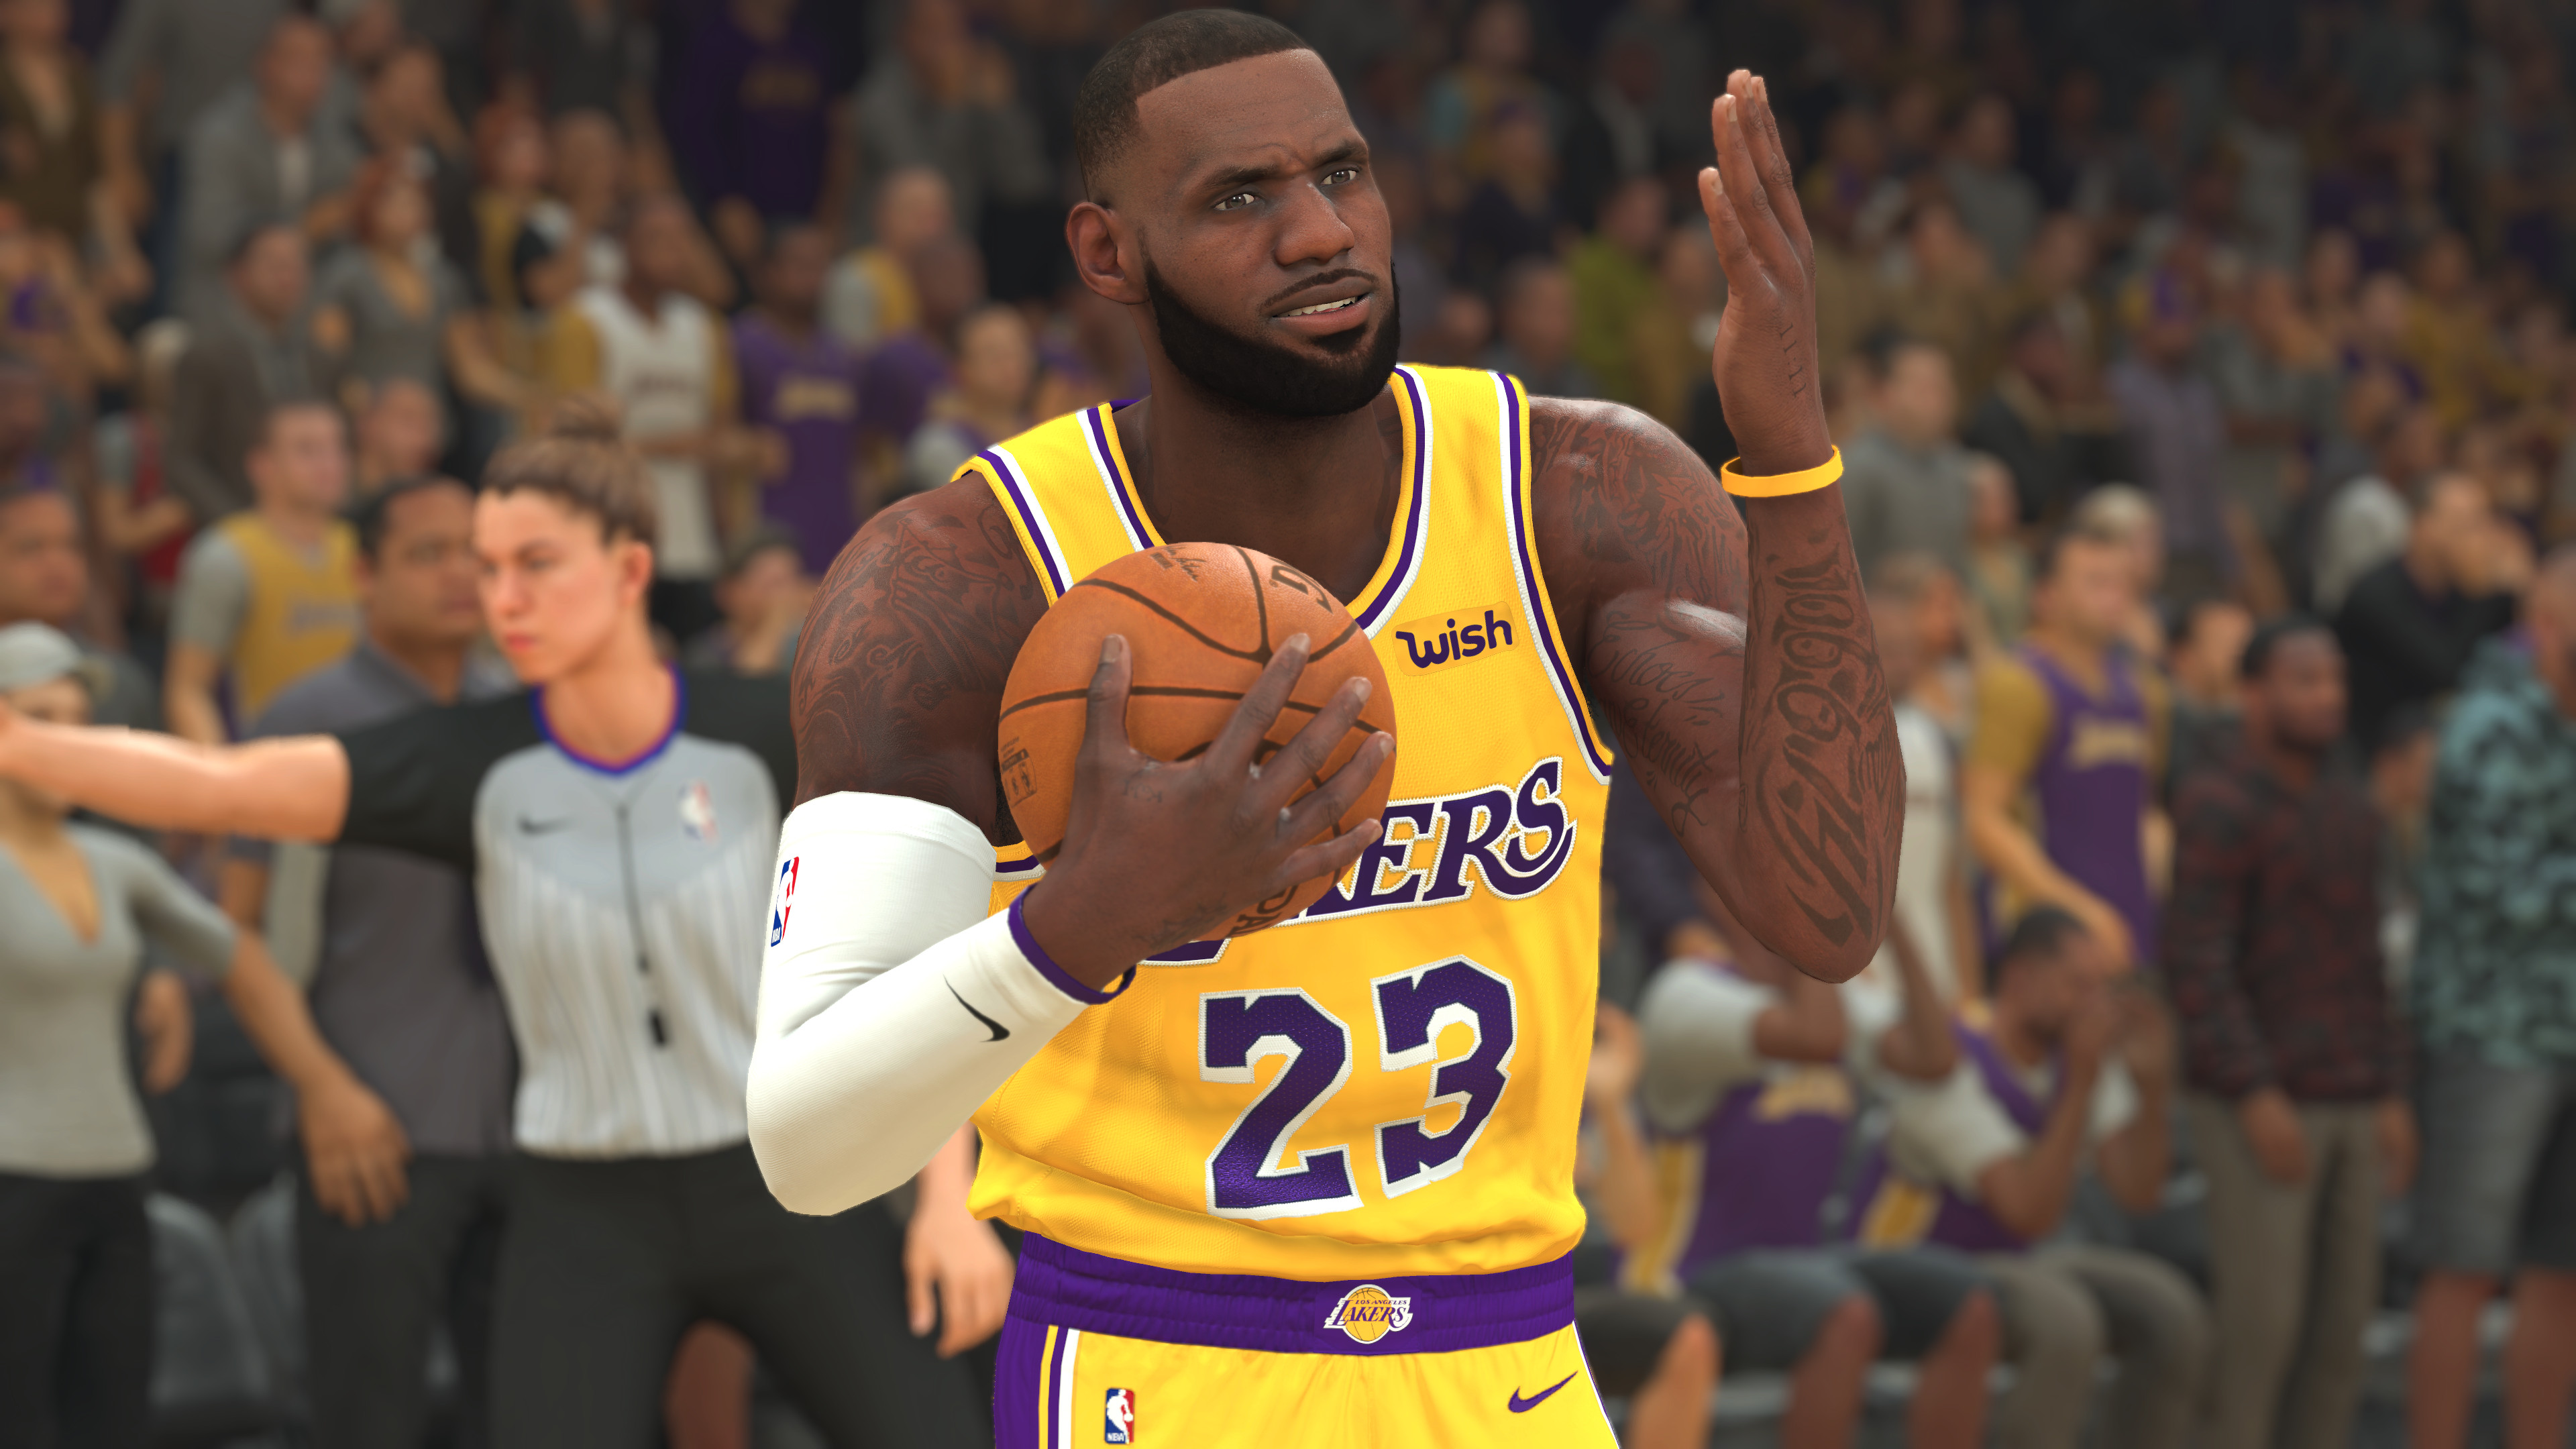 Bug Filled Nba 2k20 Launch Causes Fix2k20 To Trend On Twitter Here Are The Biggest Complaints Sporting News